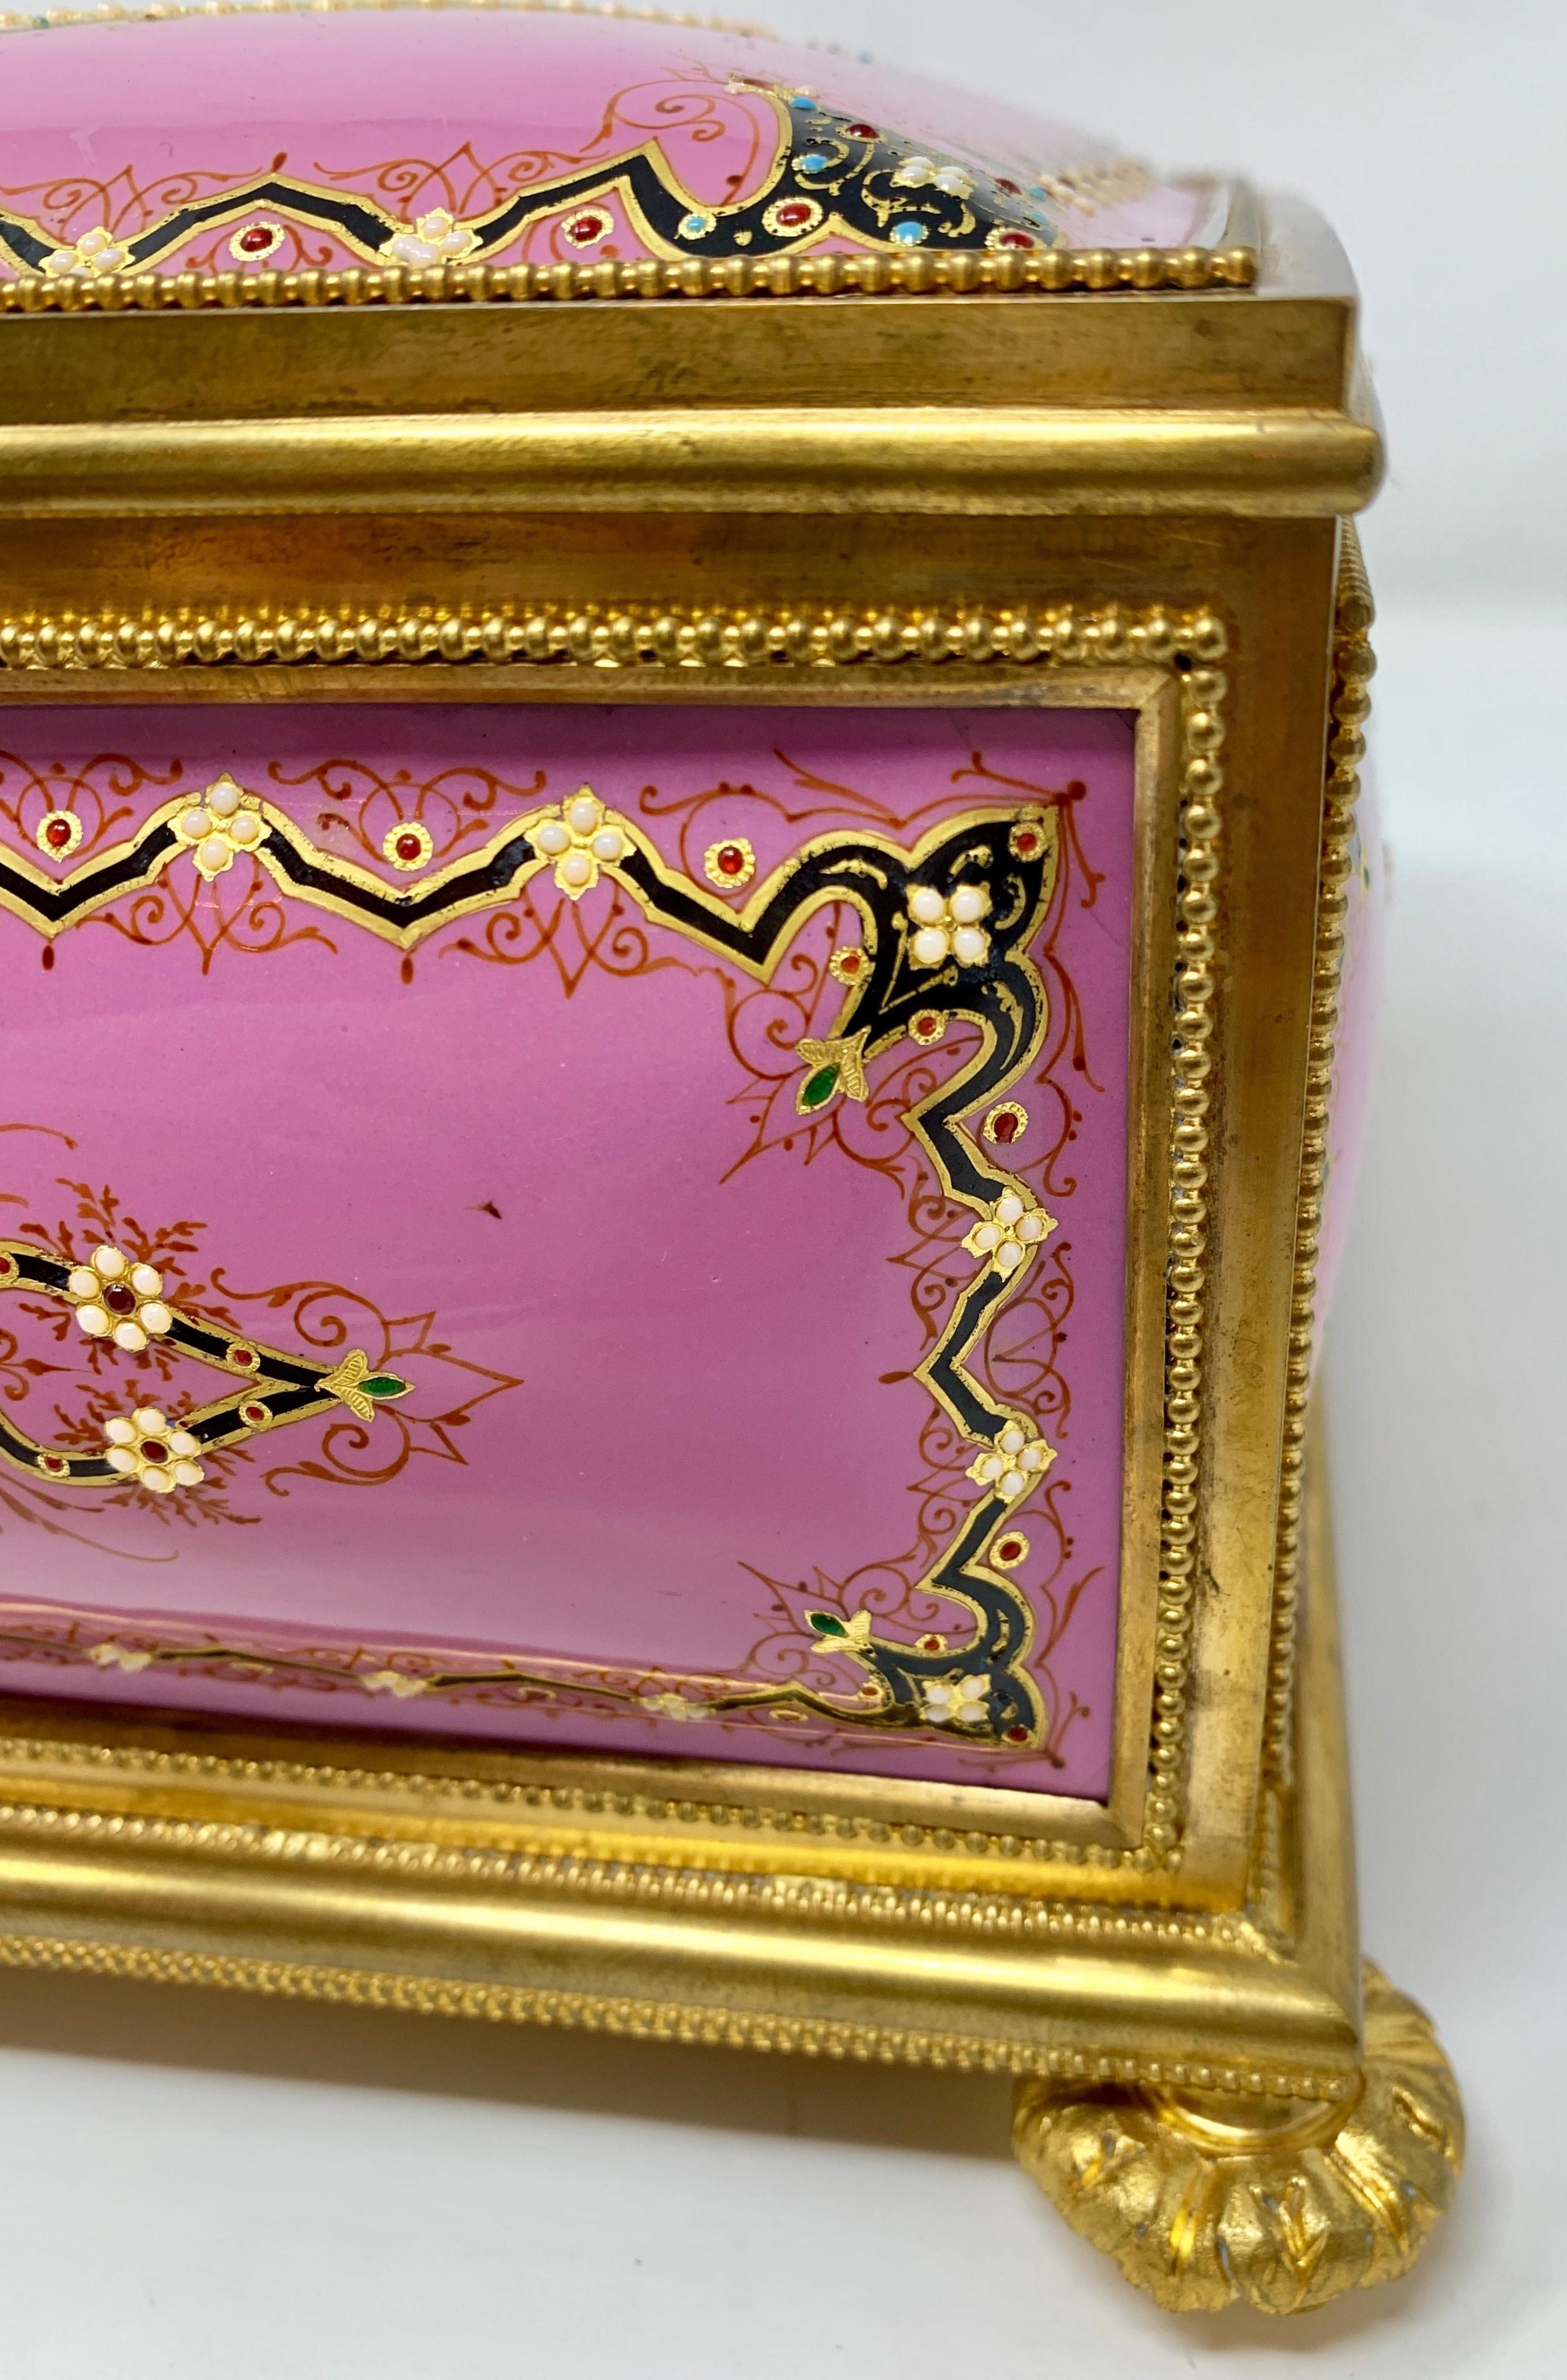 Antique French Pink Enameled Ormolu Jewel Box, circa 1870 For Sale 1